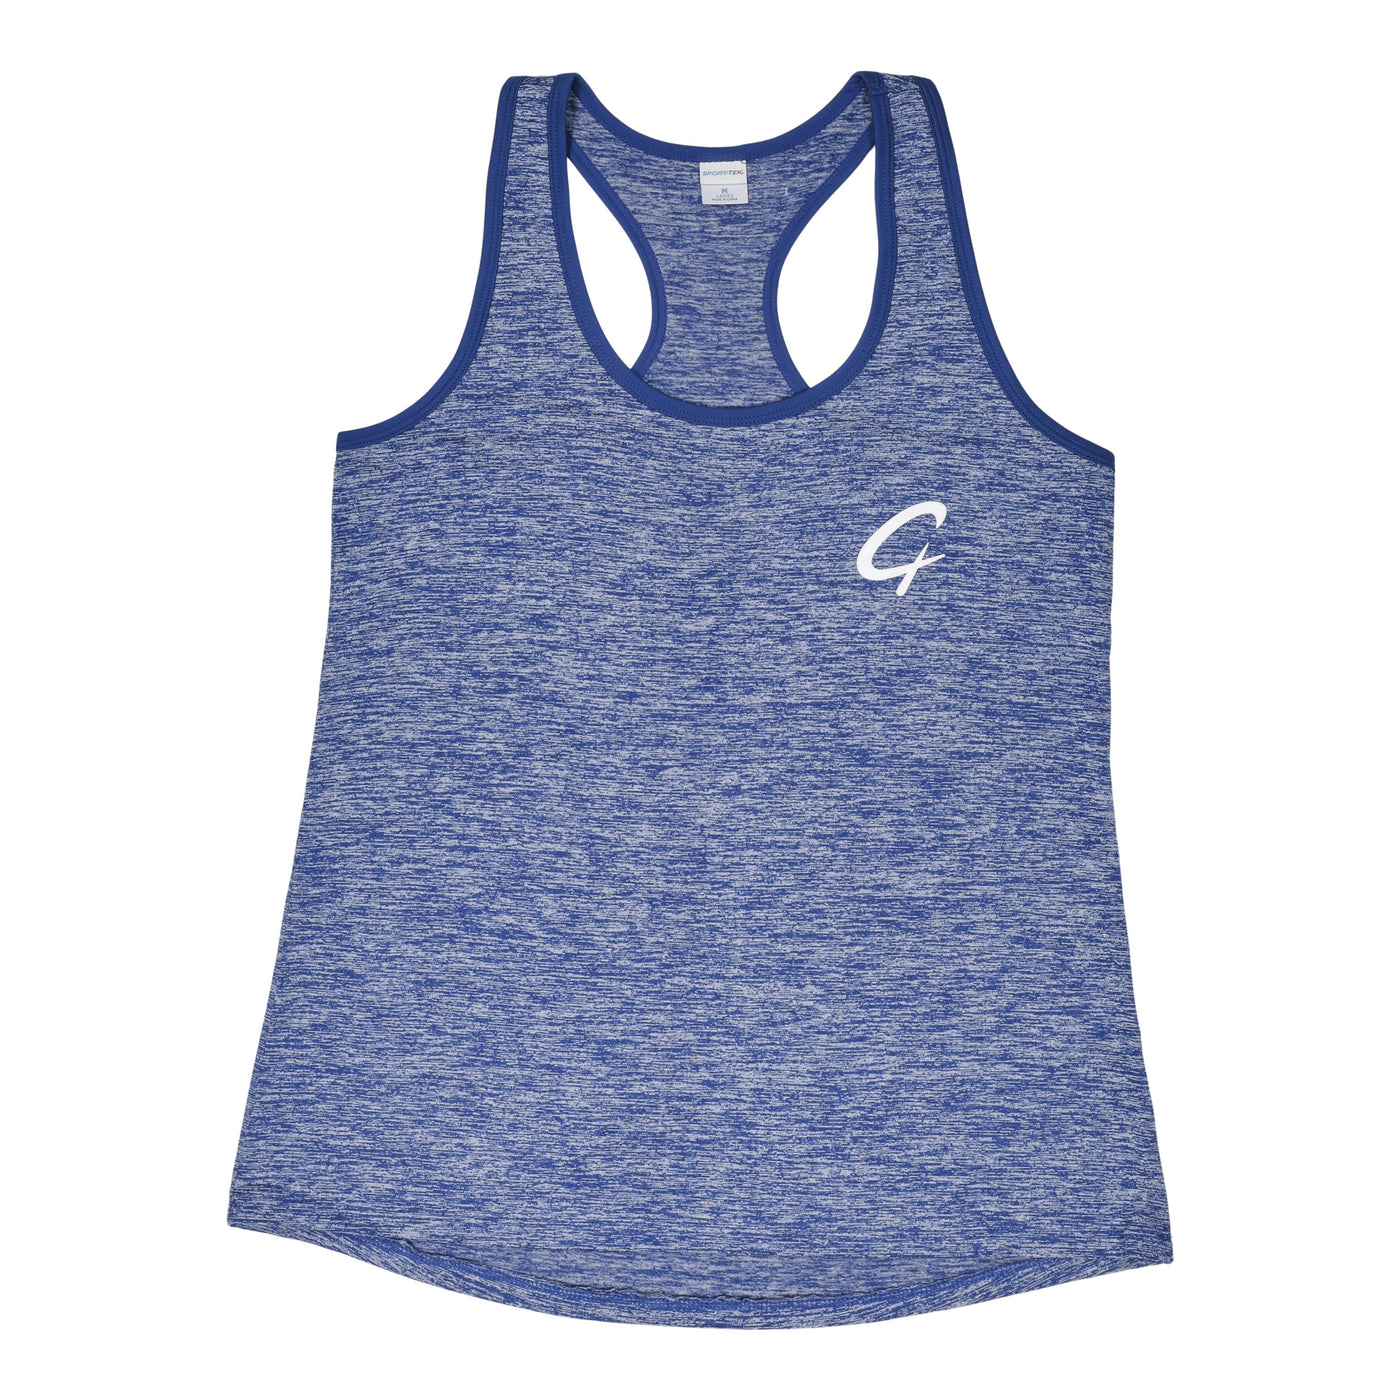 Created Women's Charged ice blue tank top front view